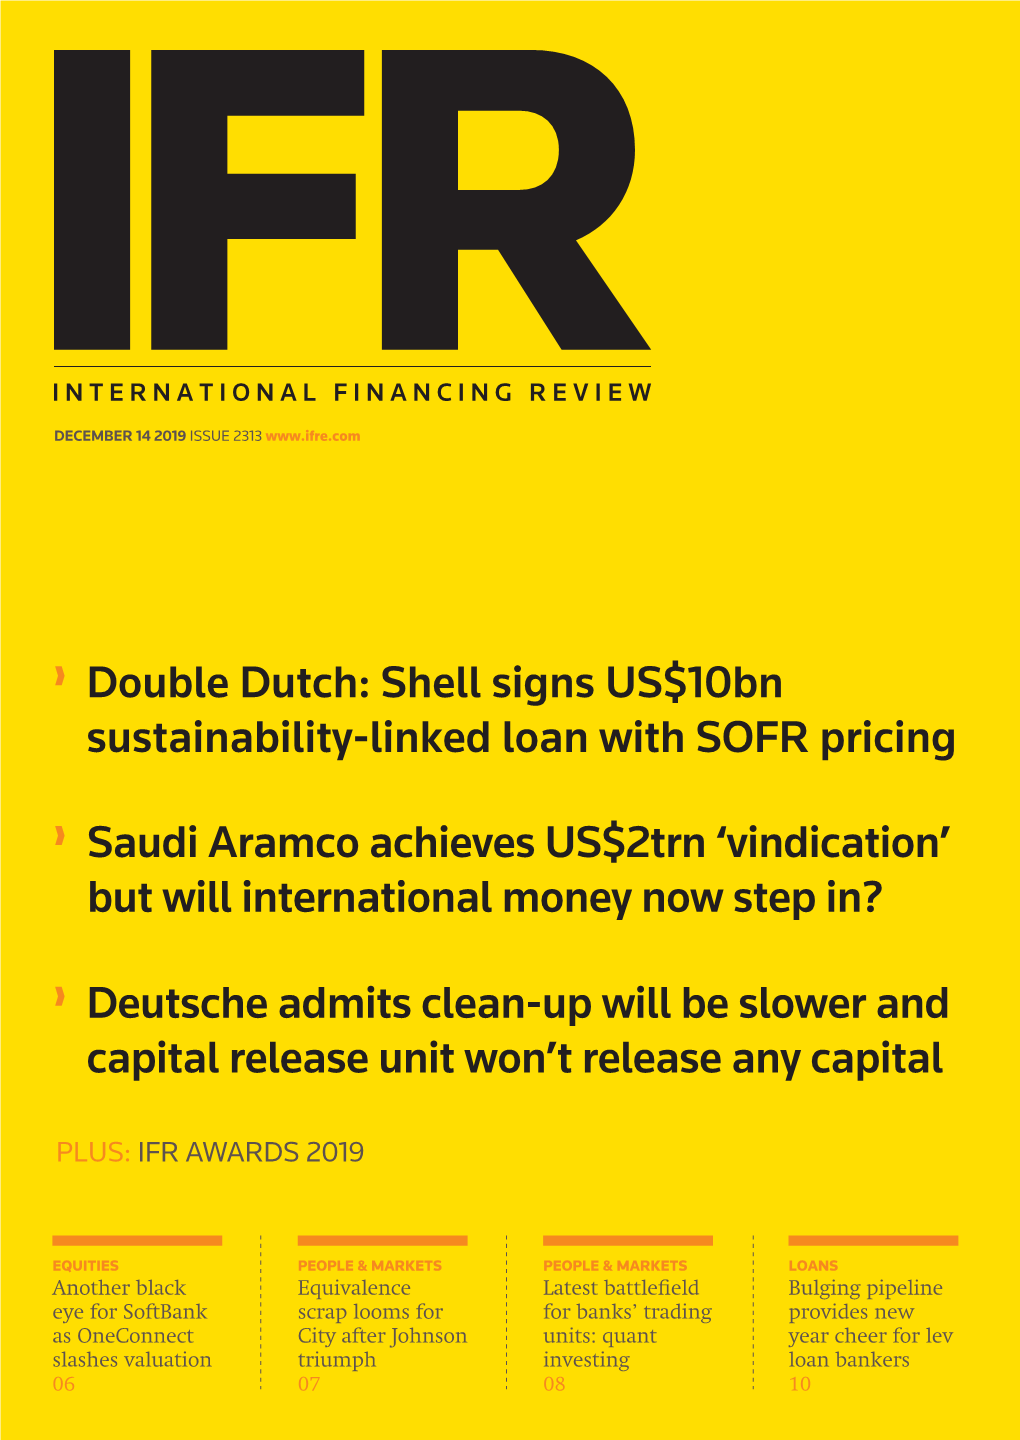 Shell Signs US$10Bn Sustainability-Linked Loan with SOFR Pricing